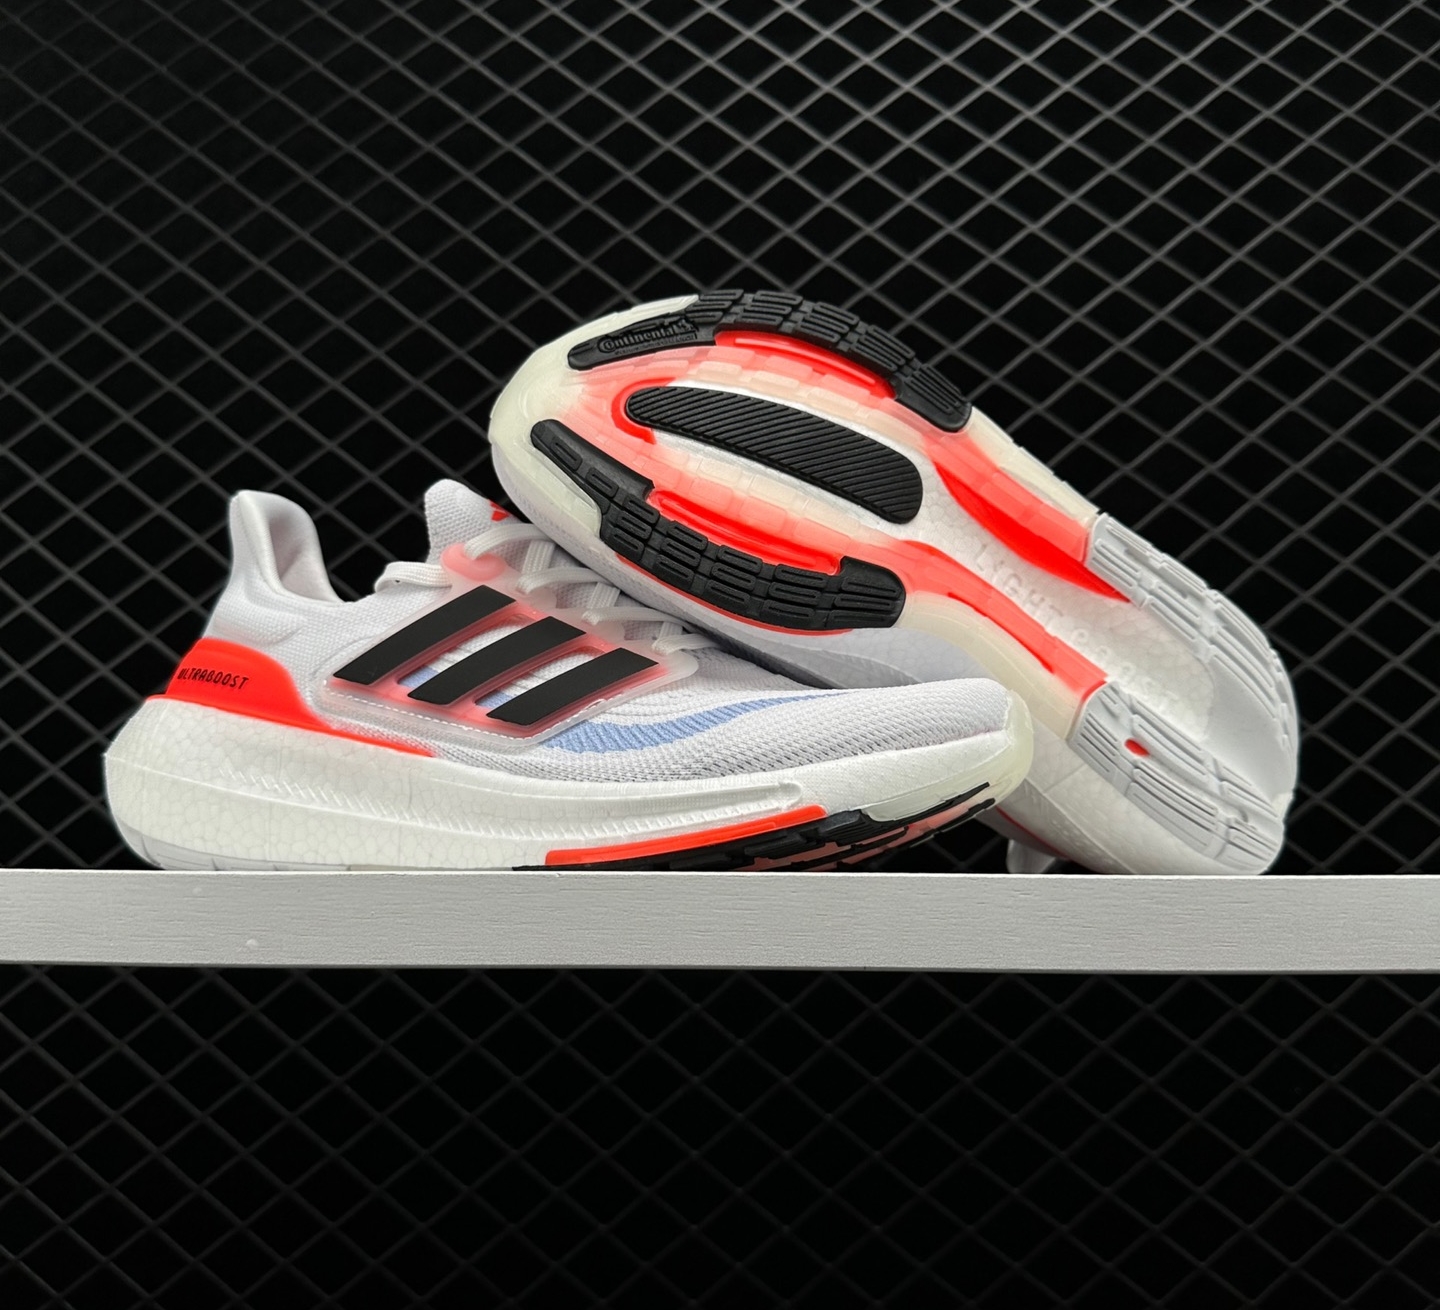 Adidas Ultra Boost Light White Black Solar Red - HQ6351: Performance and Style with Superior Comfort